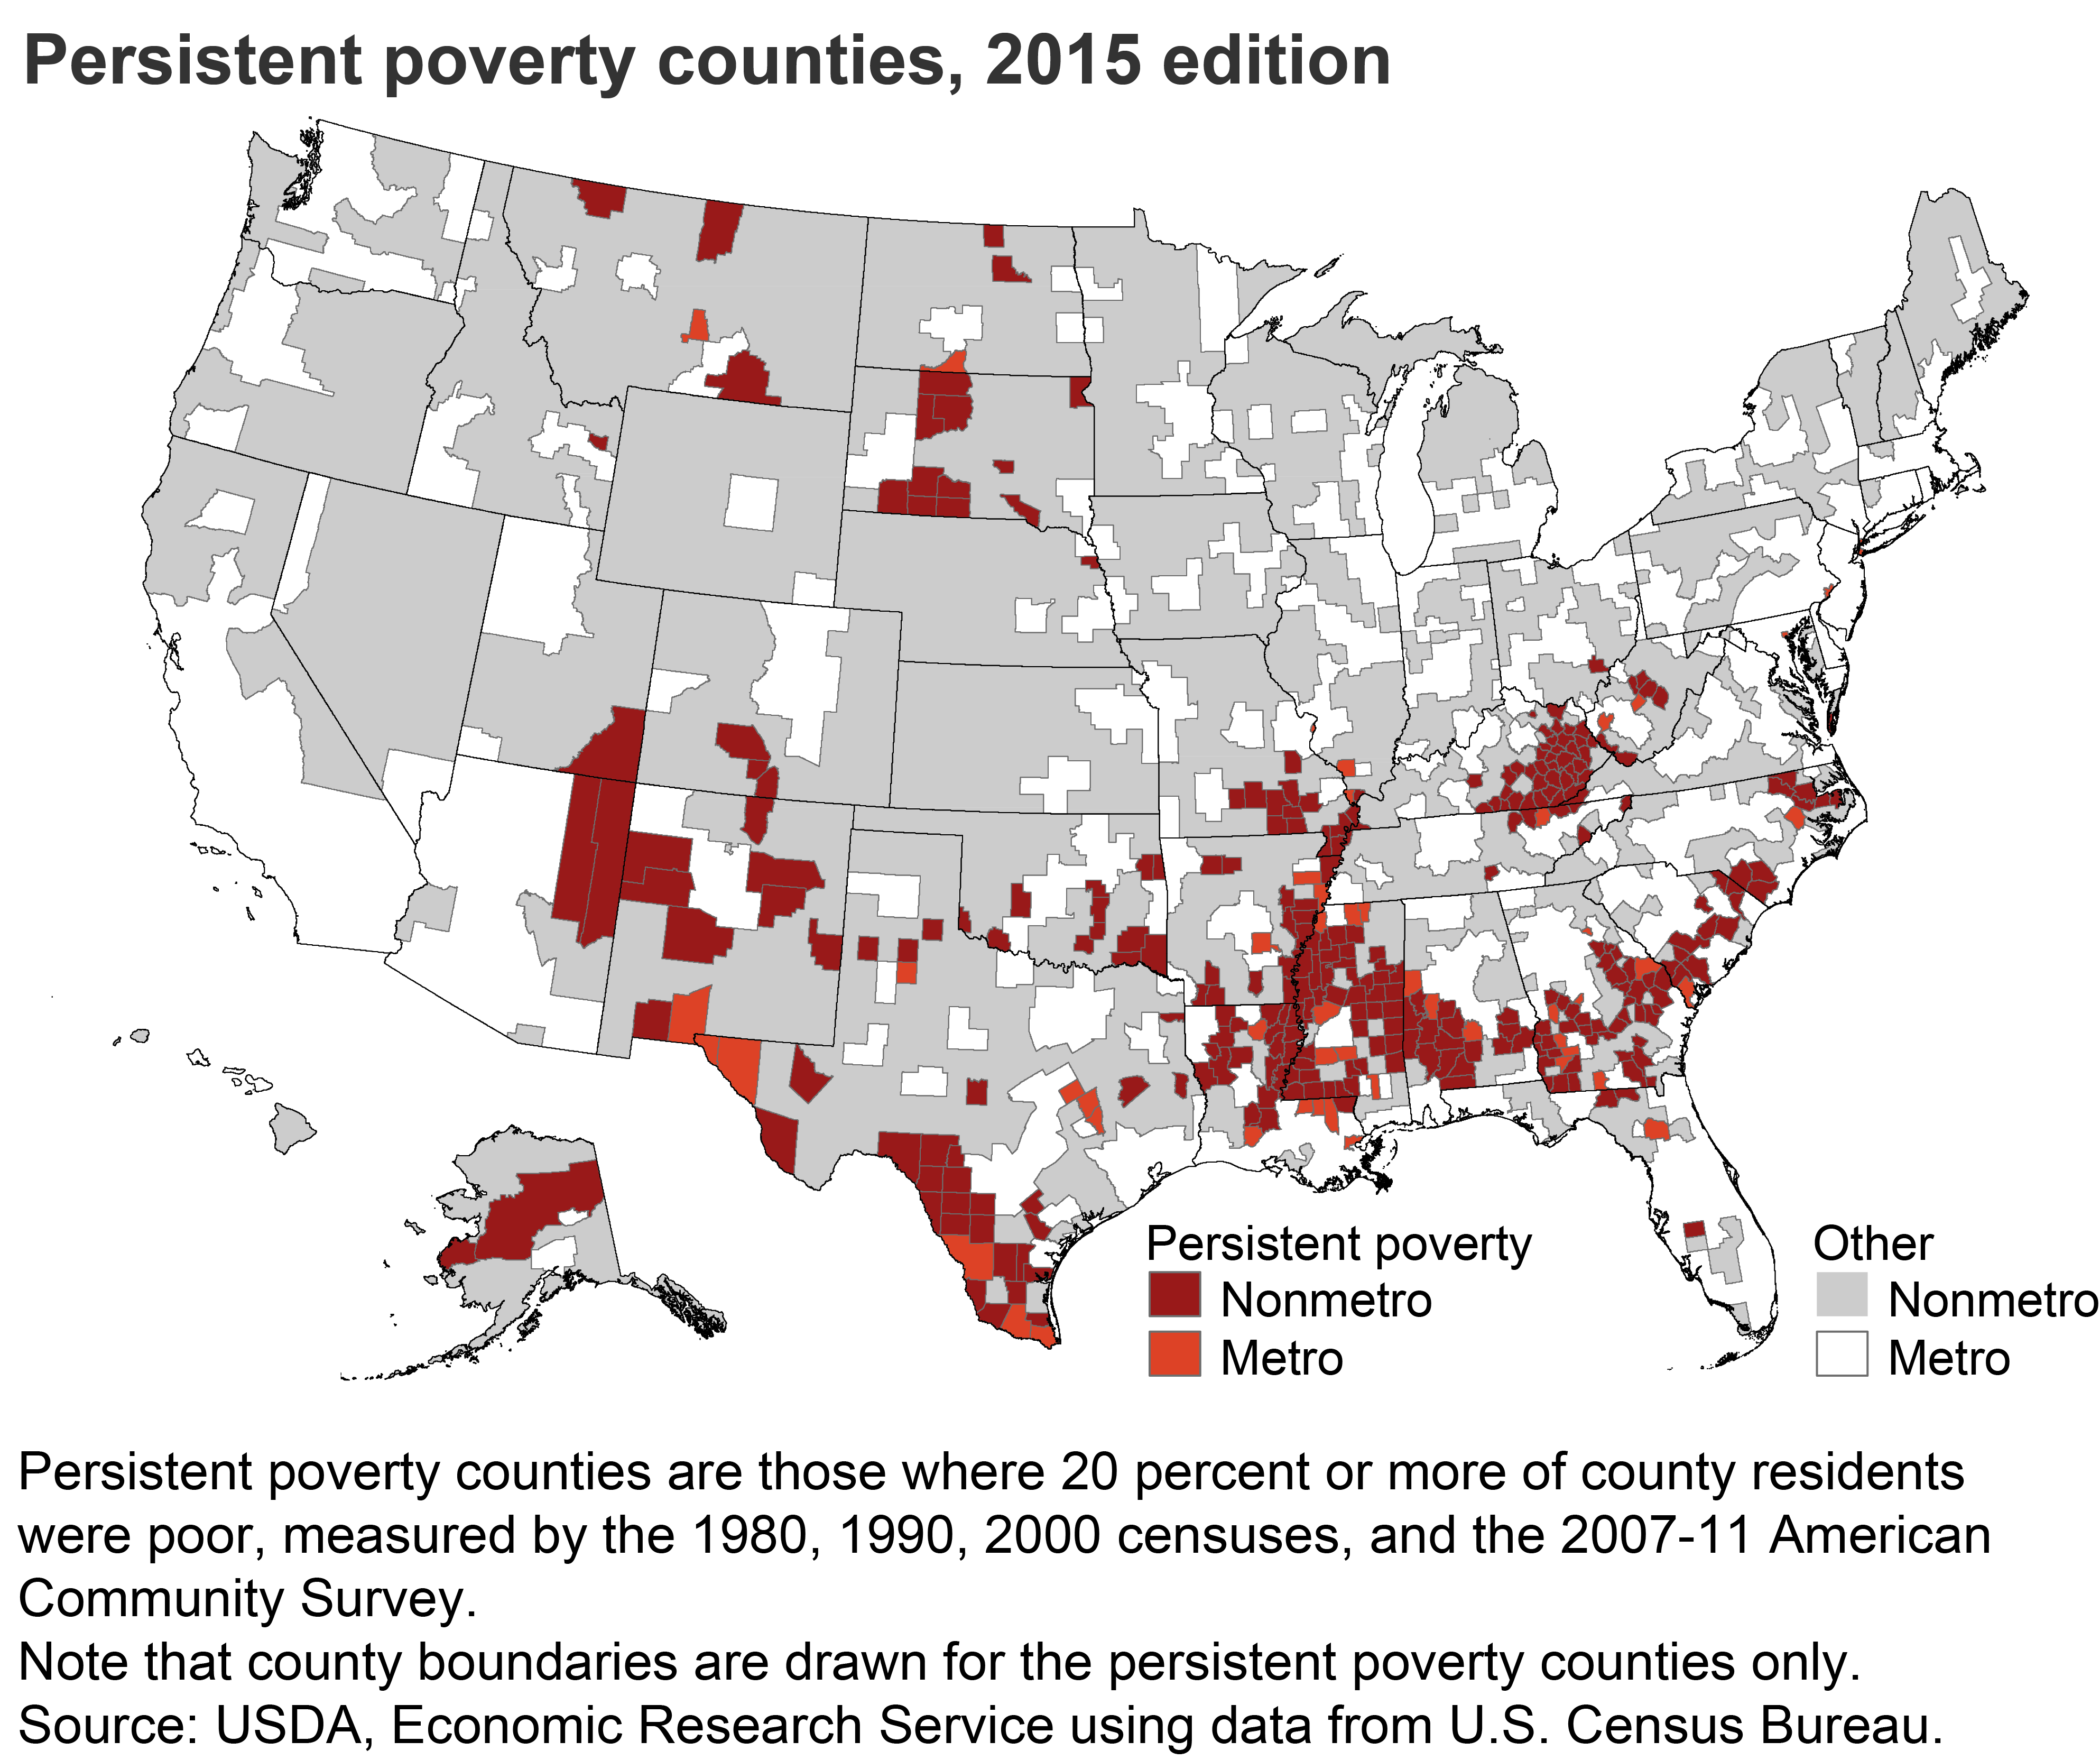 Persistent Poverty Counties, 2015 ed.